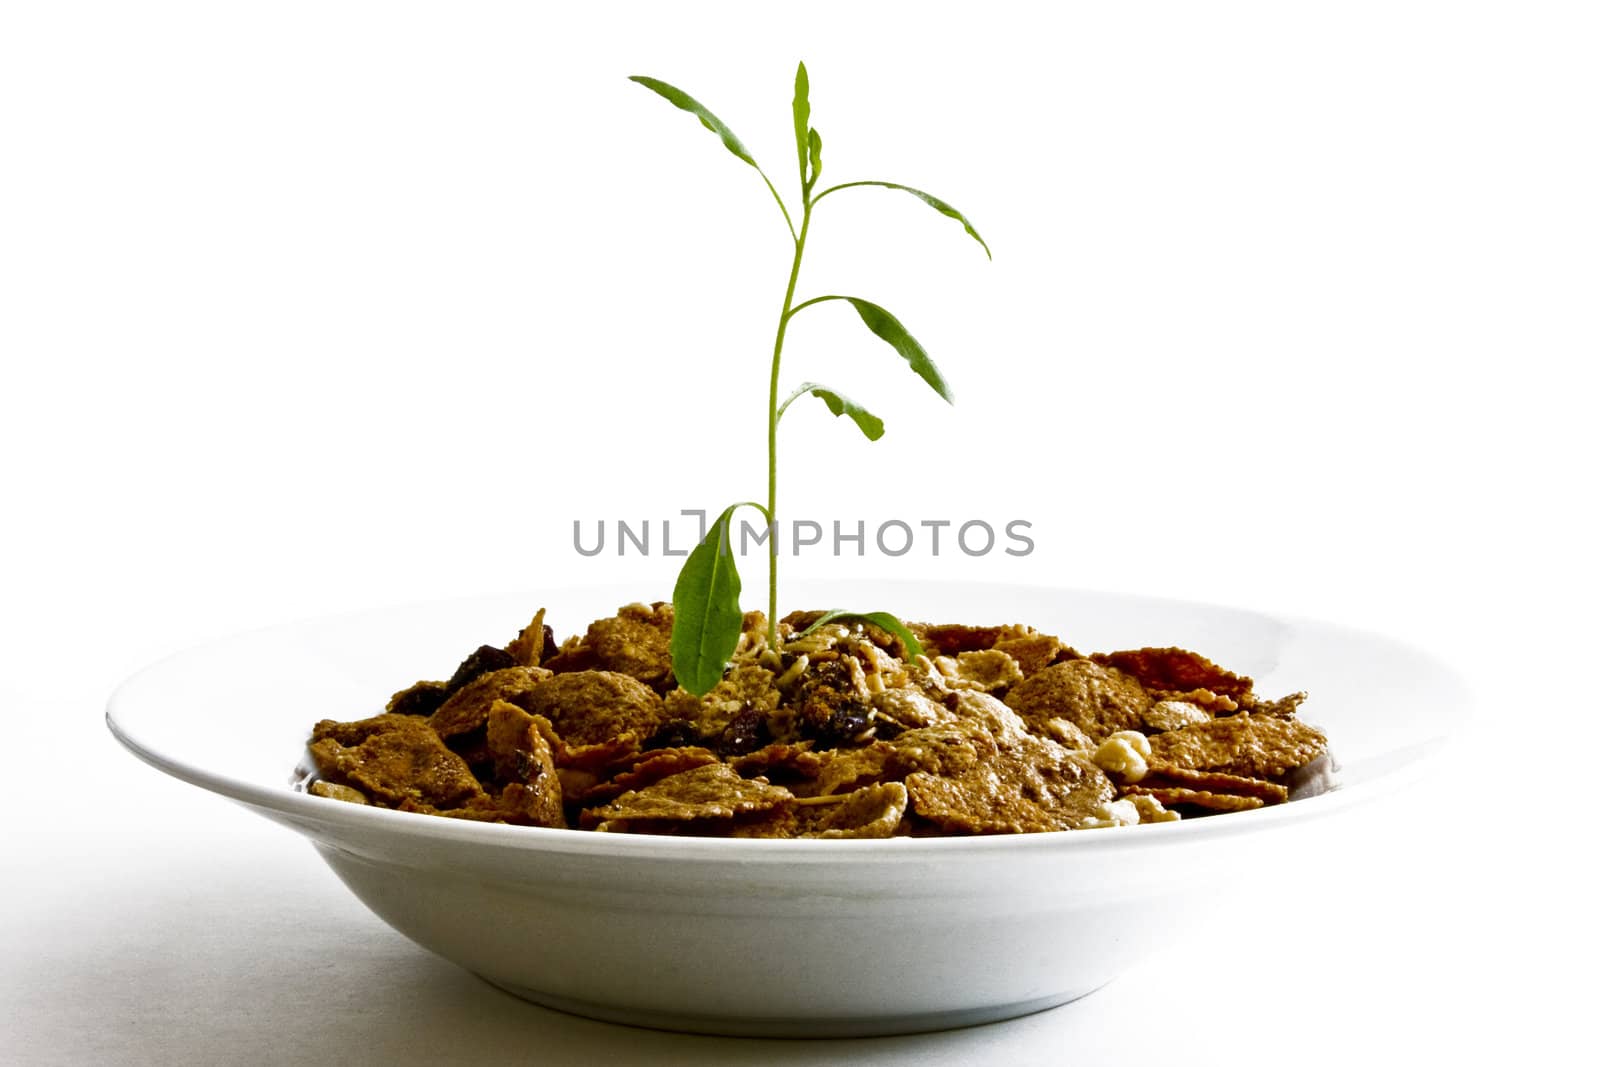 Plant Growing From Cereal on White by wulloa